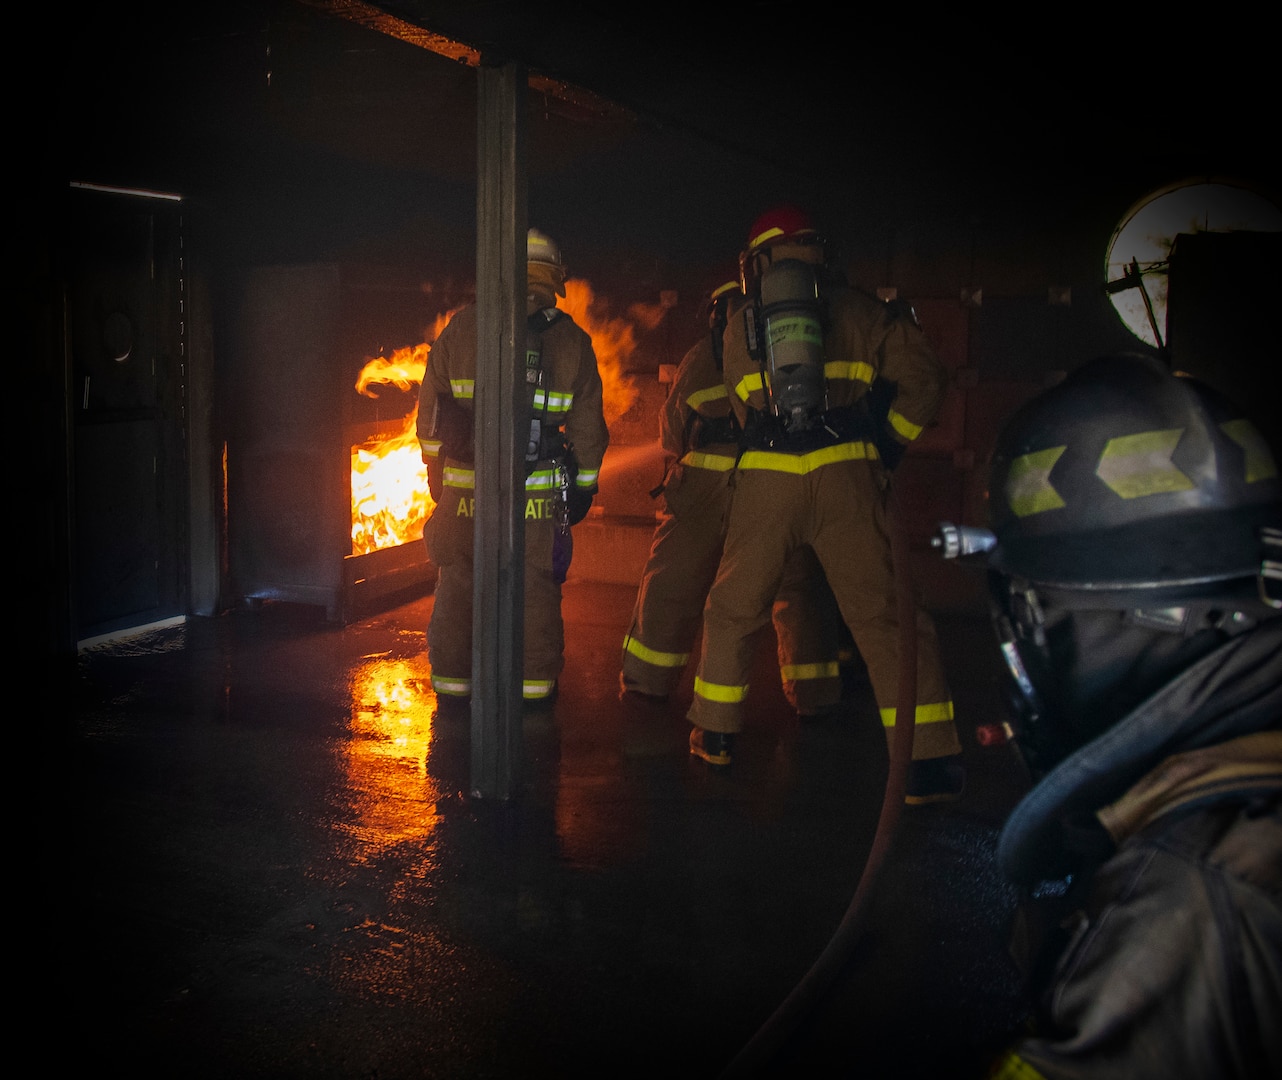 Battalion Chief of Training Mike Applegate (left) observes firefighting inside a training structure designed to simulate a ships galley. (U.S. Navy Photo by Wendy Hallmark)